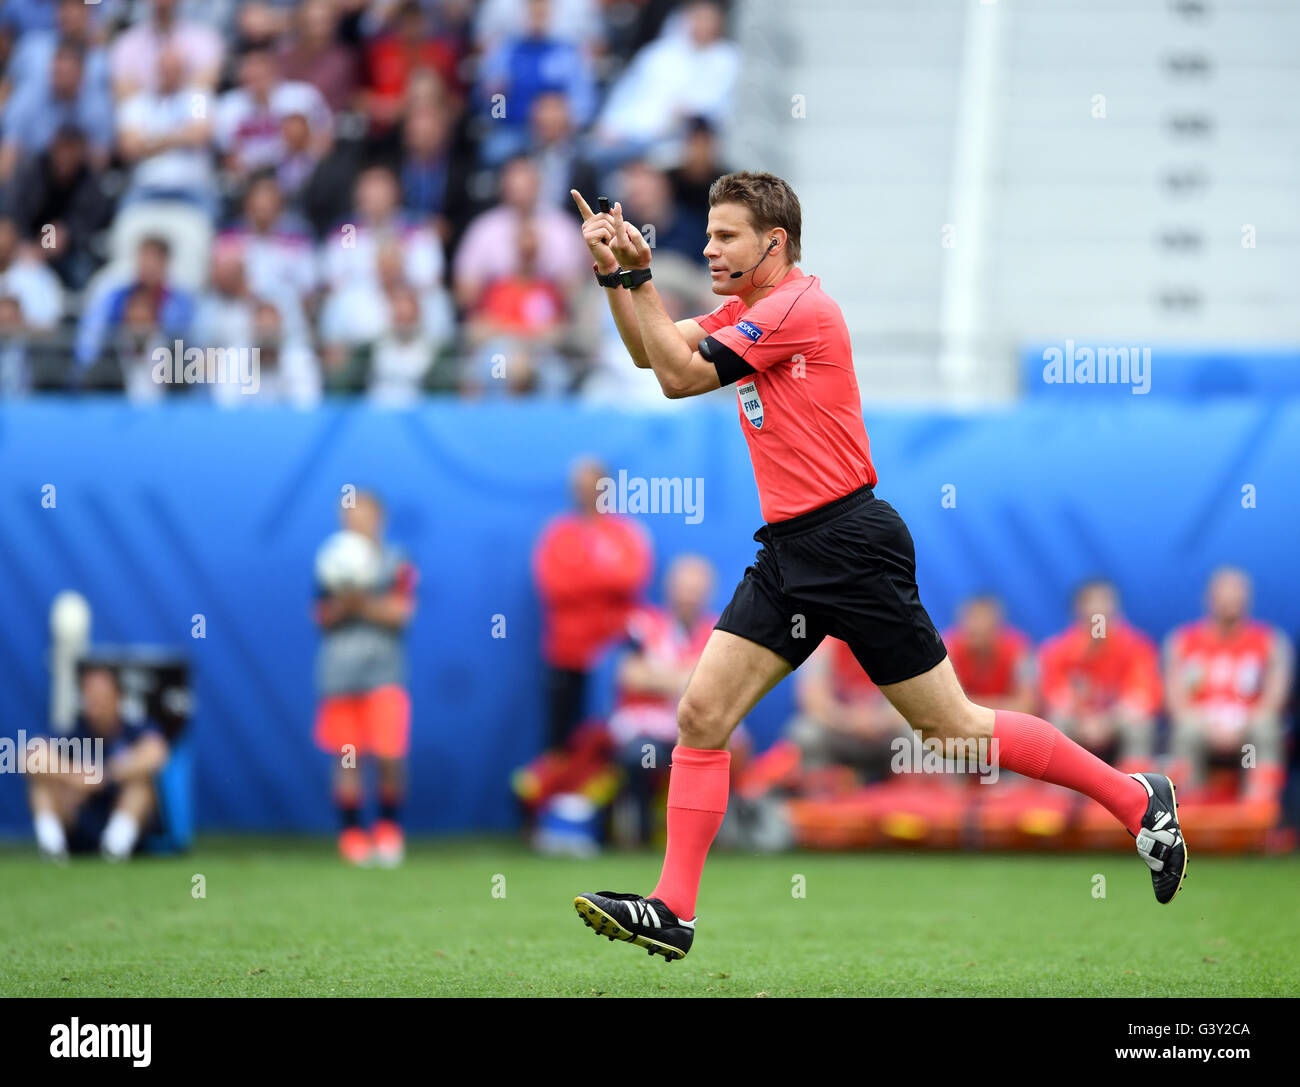 Lens, France. 16th June, 2016. Referee Felix Brych of Germany runs during the Euro 2016 Group B soccer match between England and Wales at the Stade Bollaert-Delelis stadium, Lens, France, June 16, 2016. Photo: Marius Becker/dpa/Alamy Live News Stock Photo